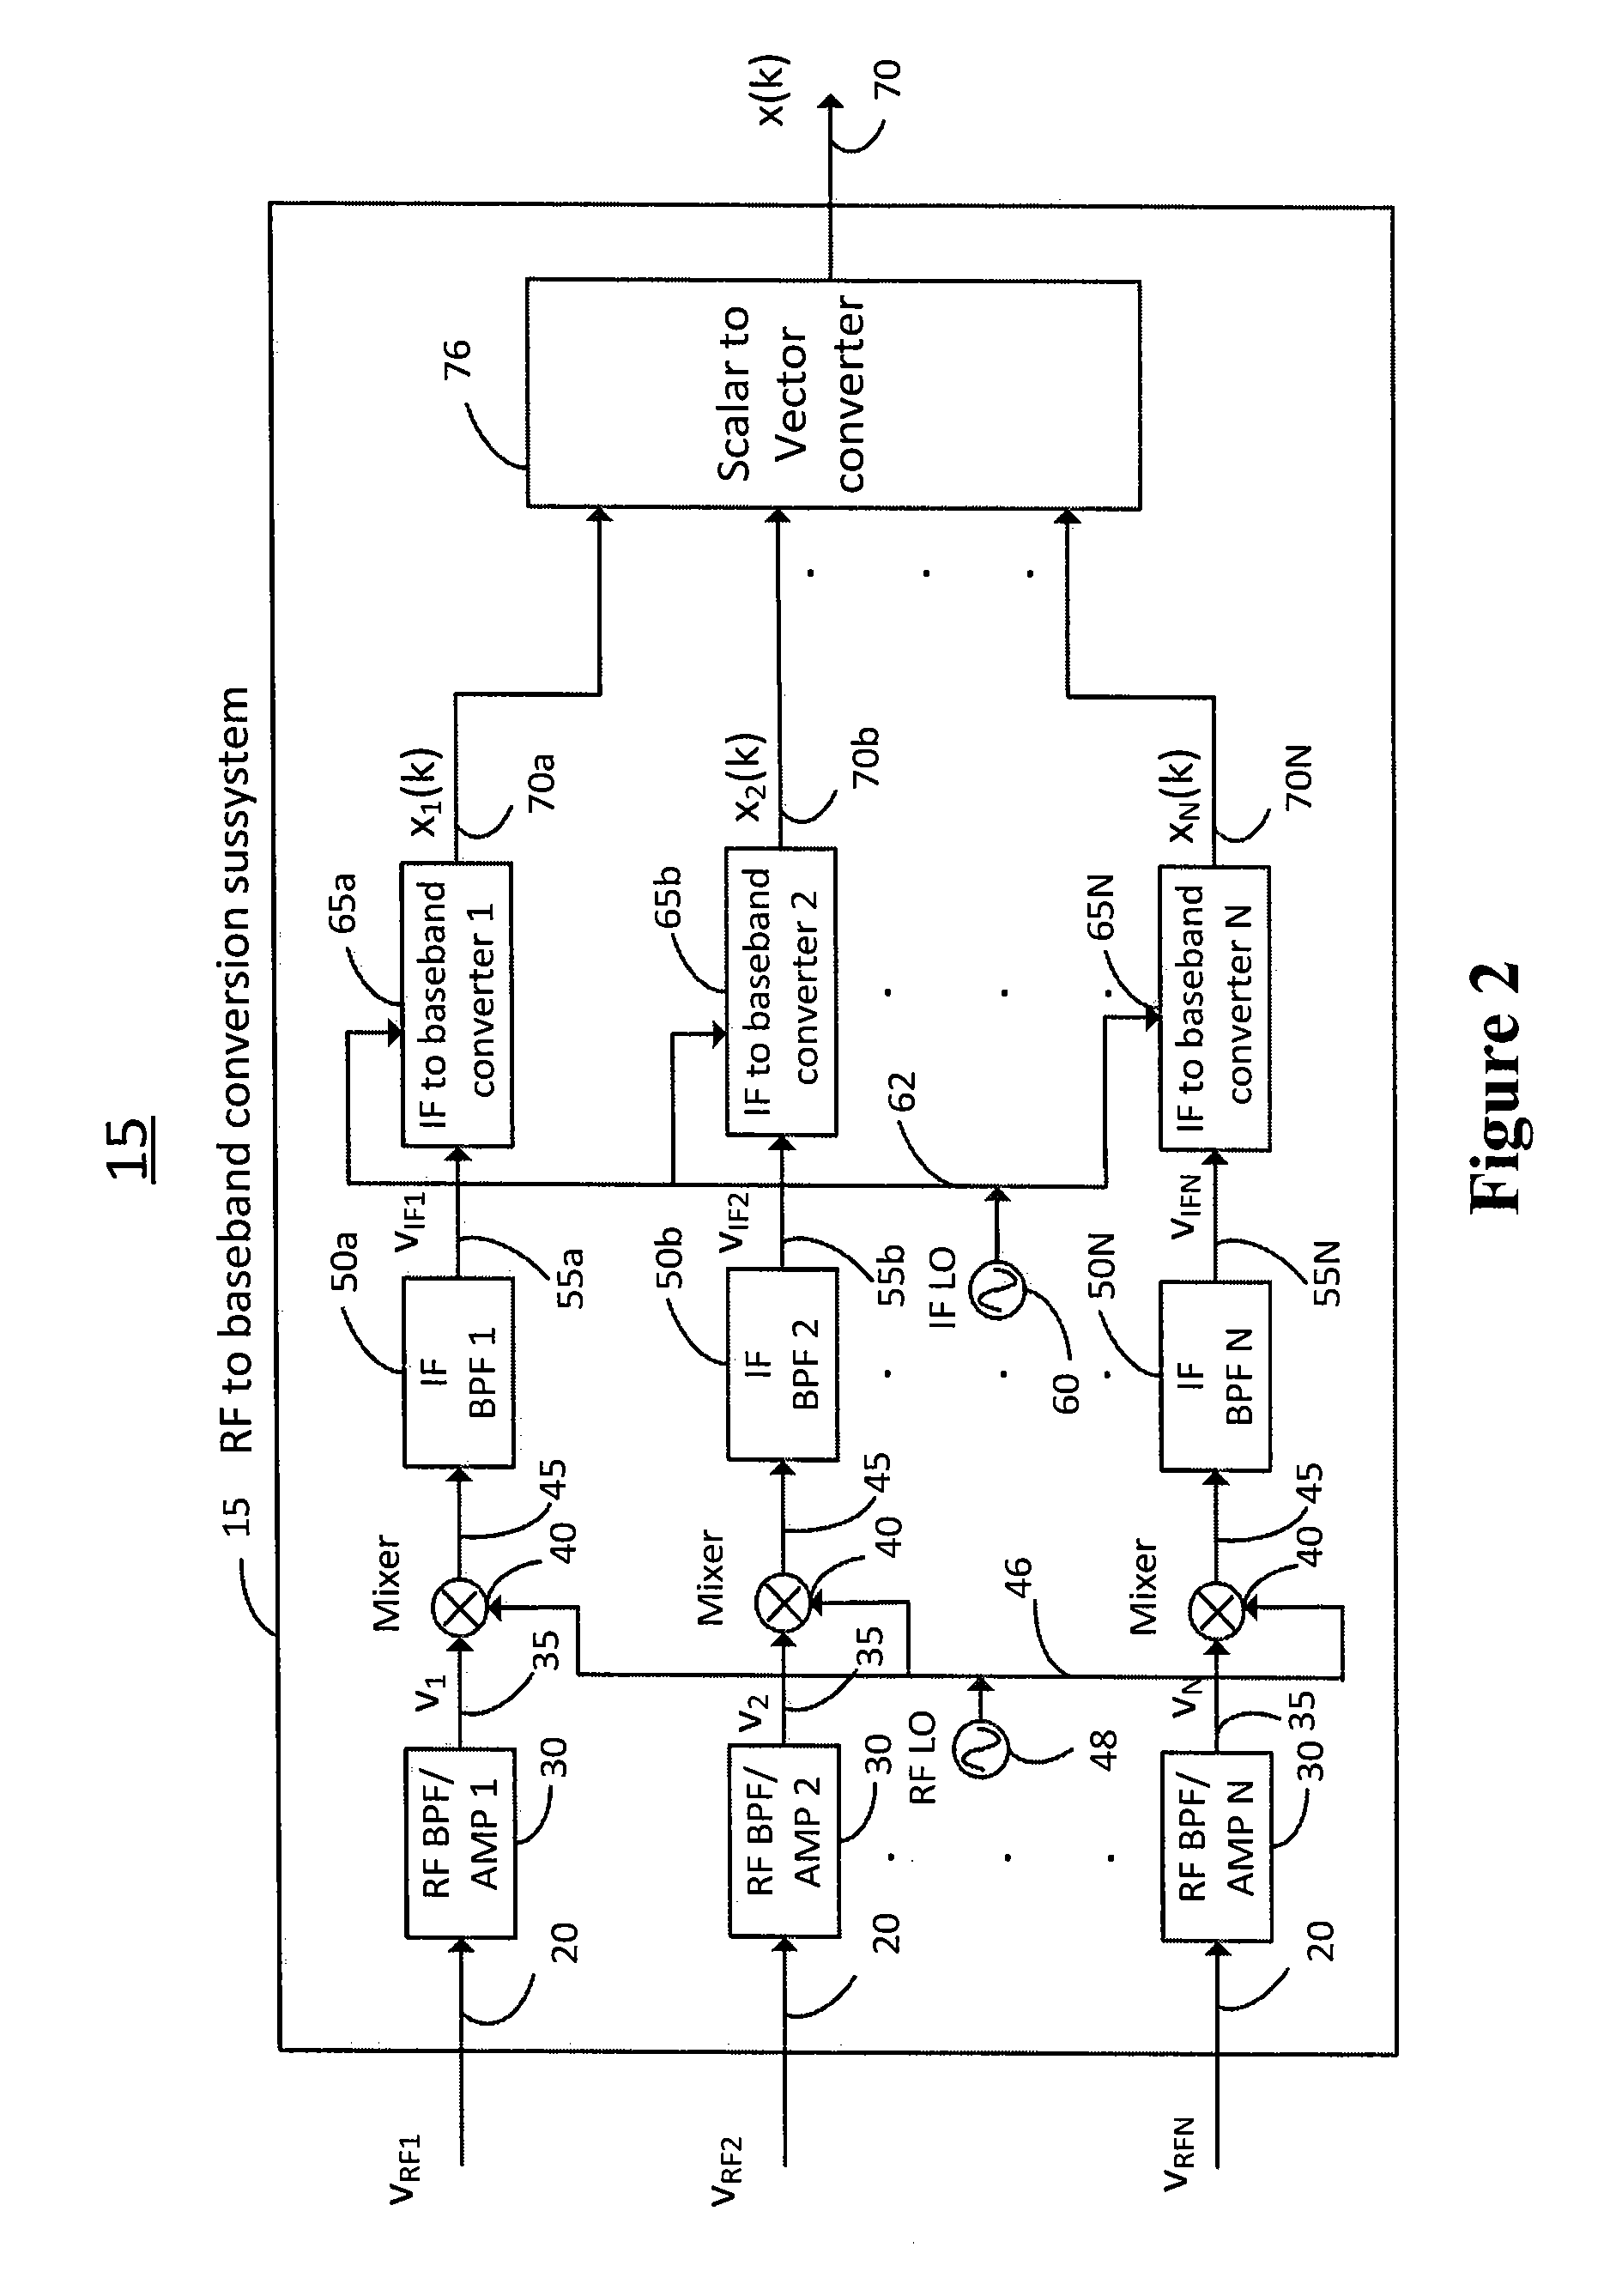 Systems and methods for multi-beam antenna architectures for adaptive nulling of interference signals